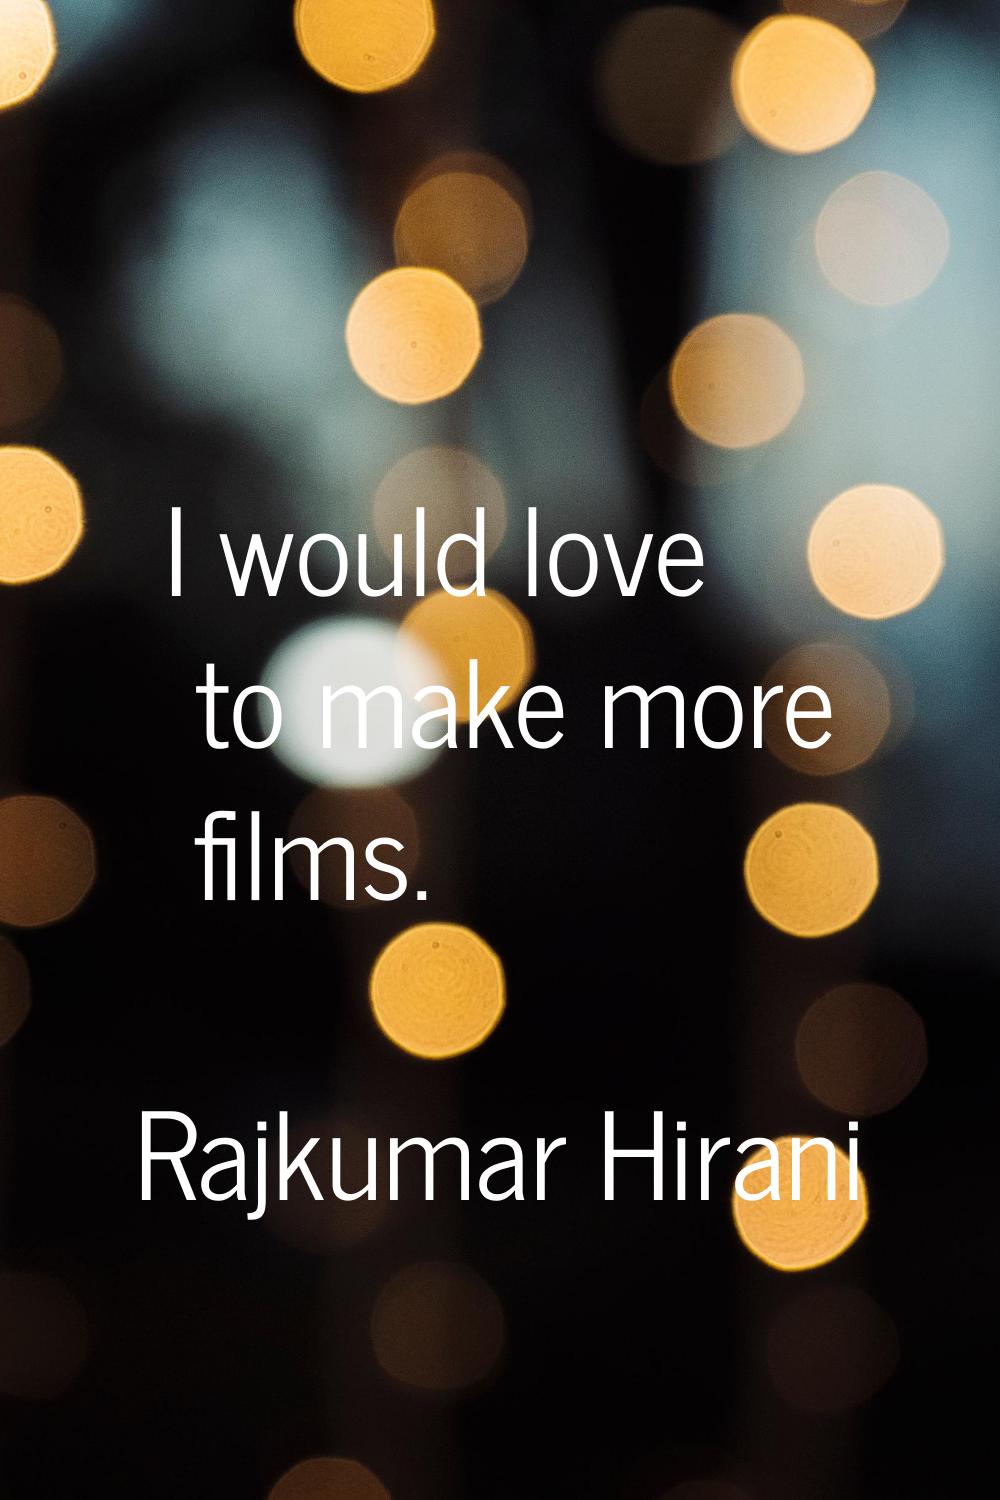 I would love to make more films.